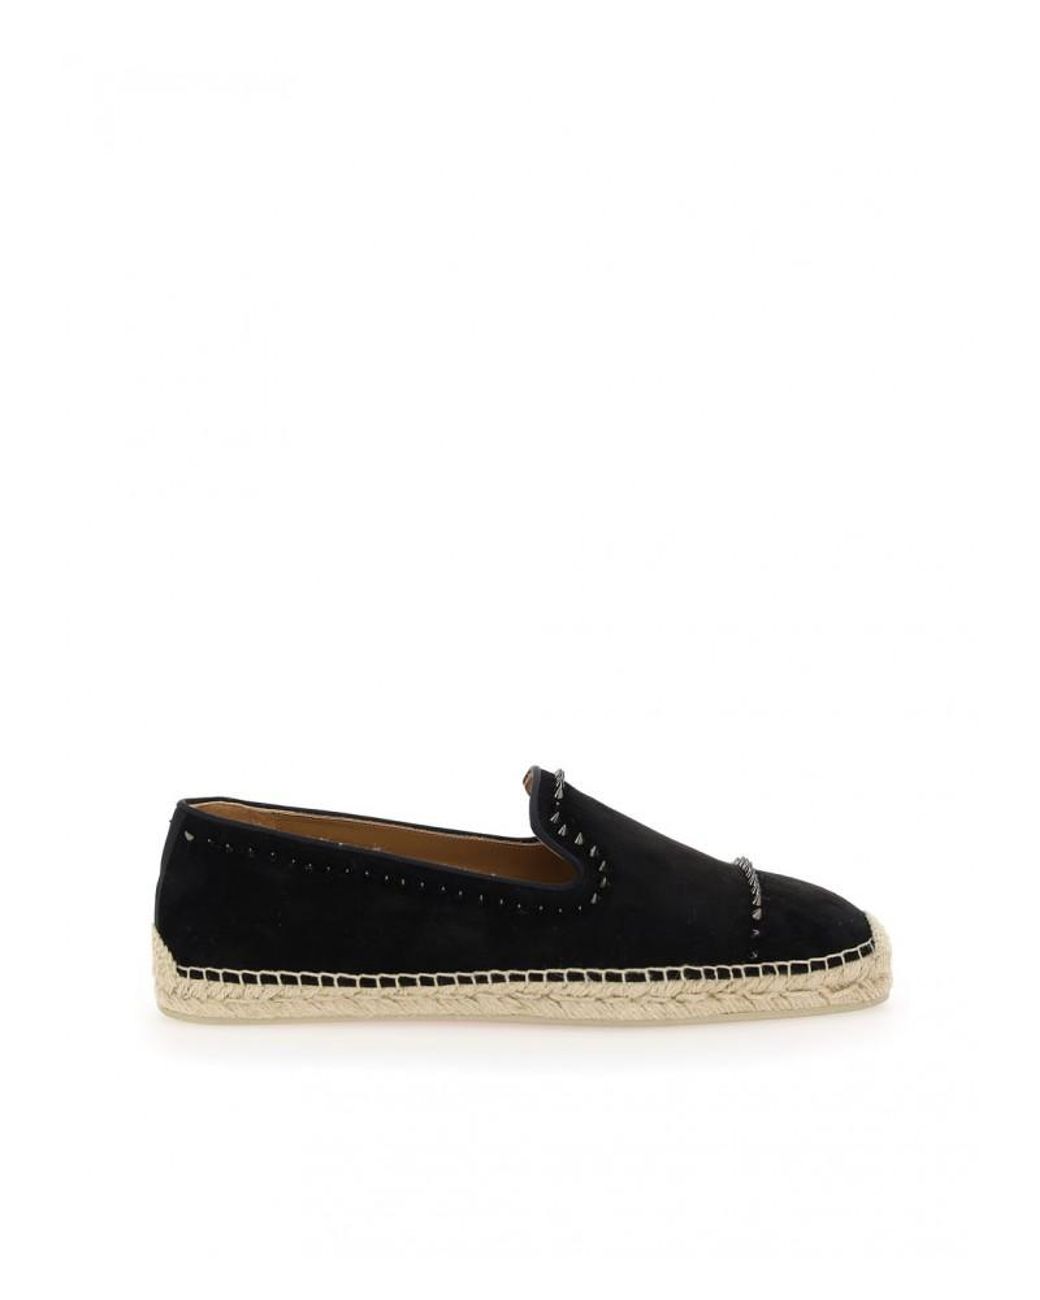 Christian Louboutin Suede Espadrilles in Black for Men - Lyst